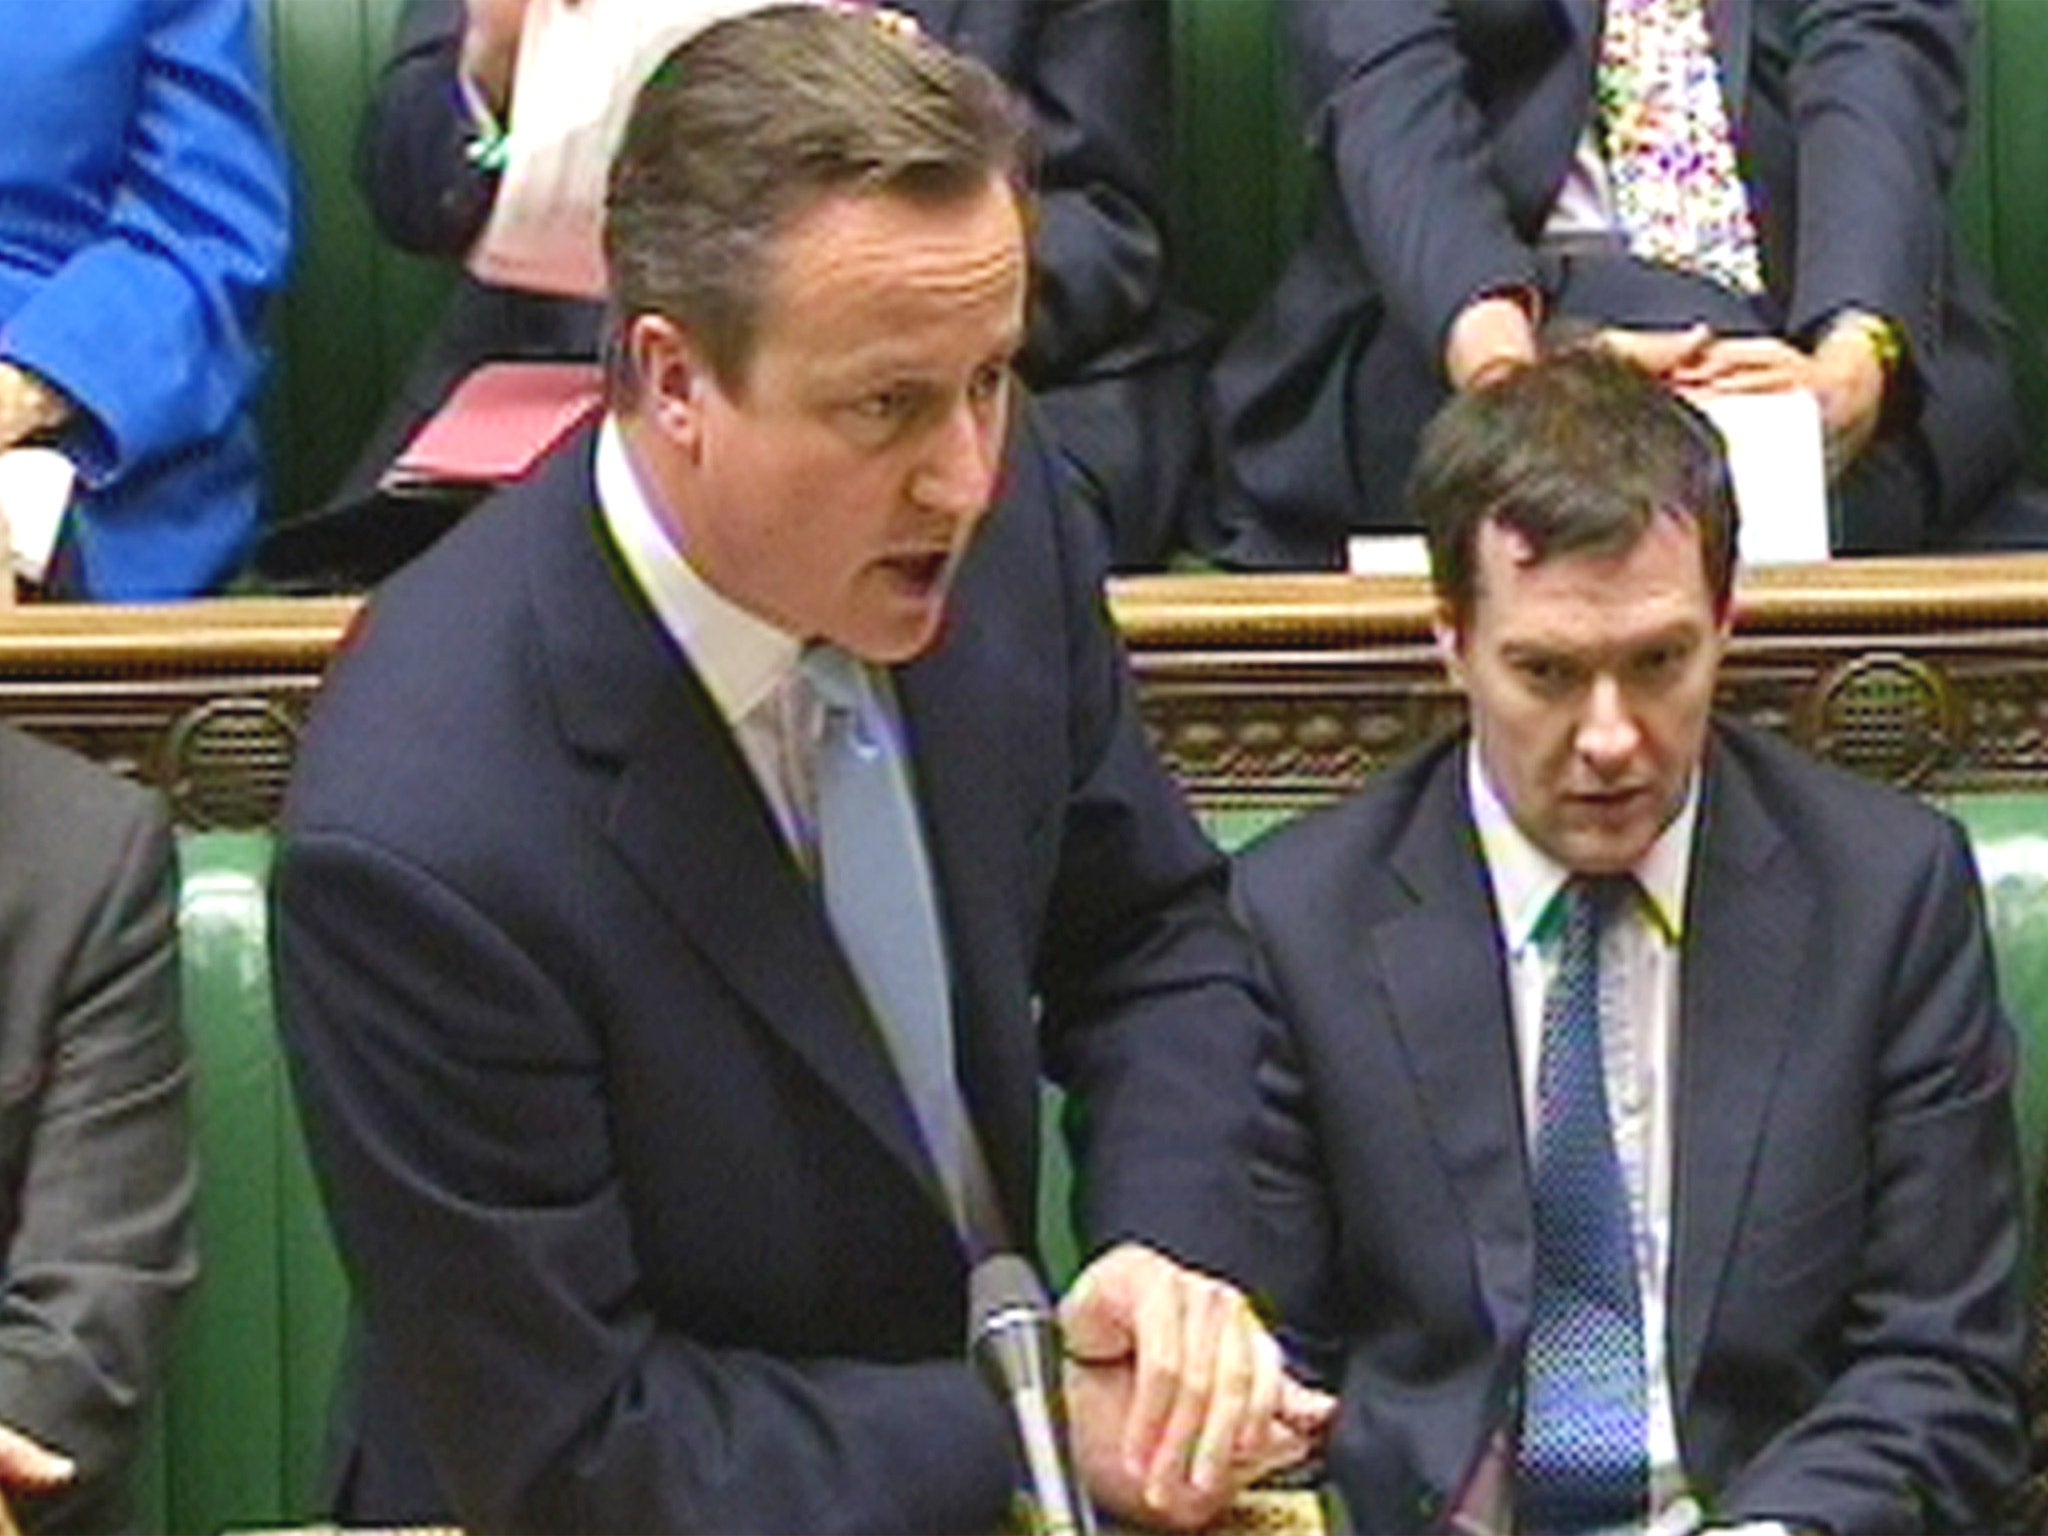 David Cameron speaks during Prime Minister's Questions in the House of Commons